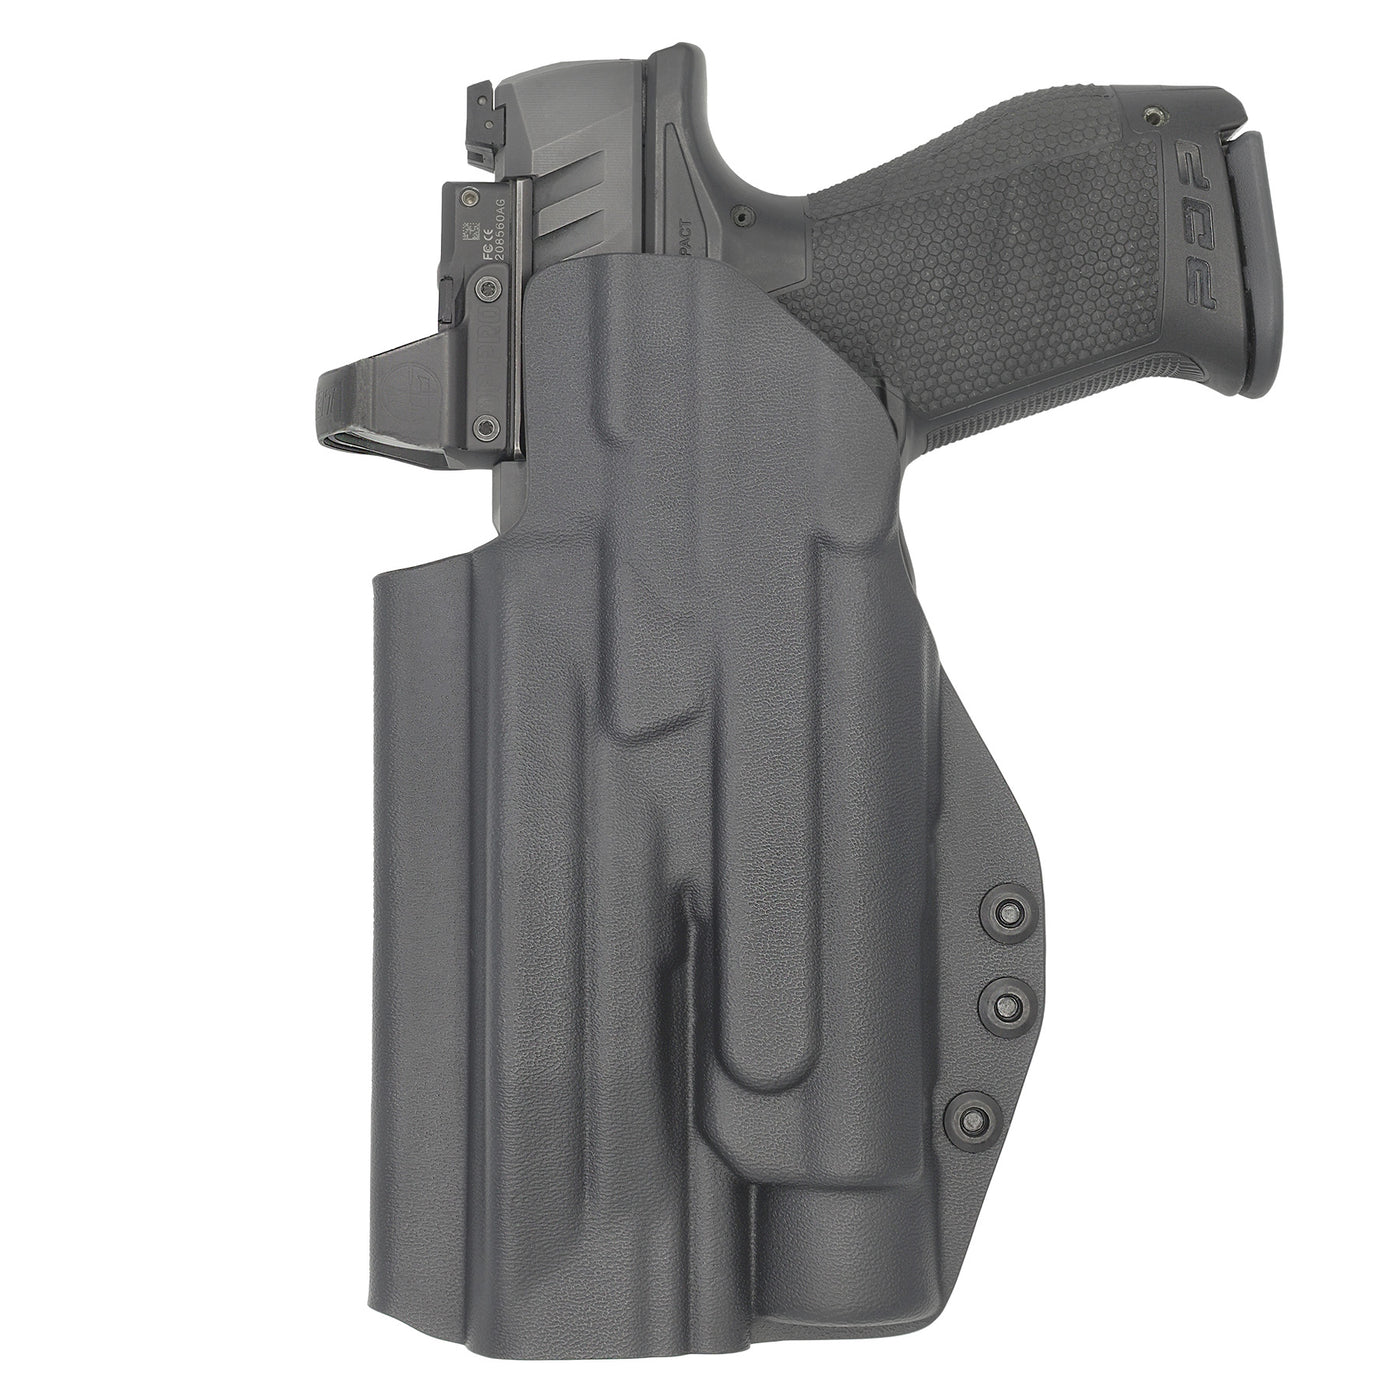 C&G Holsters Quickship IWB Tactical S&W M&P Streamlight TLR1/HL in holstered position back view